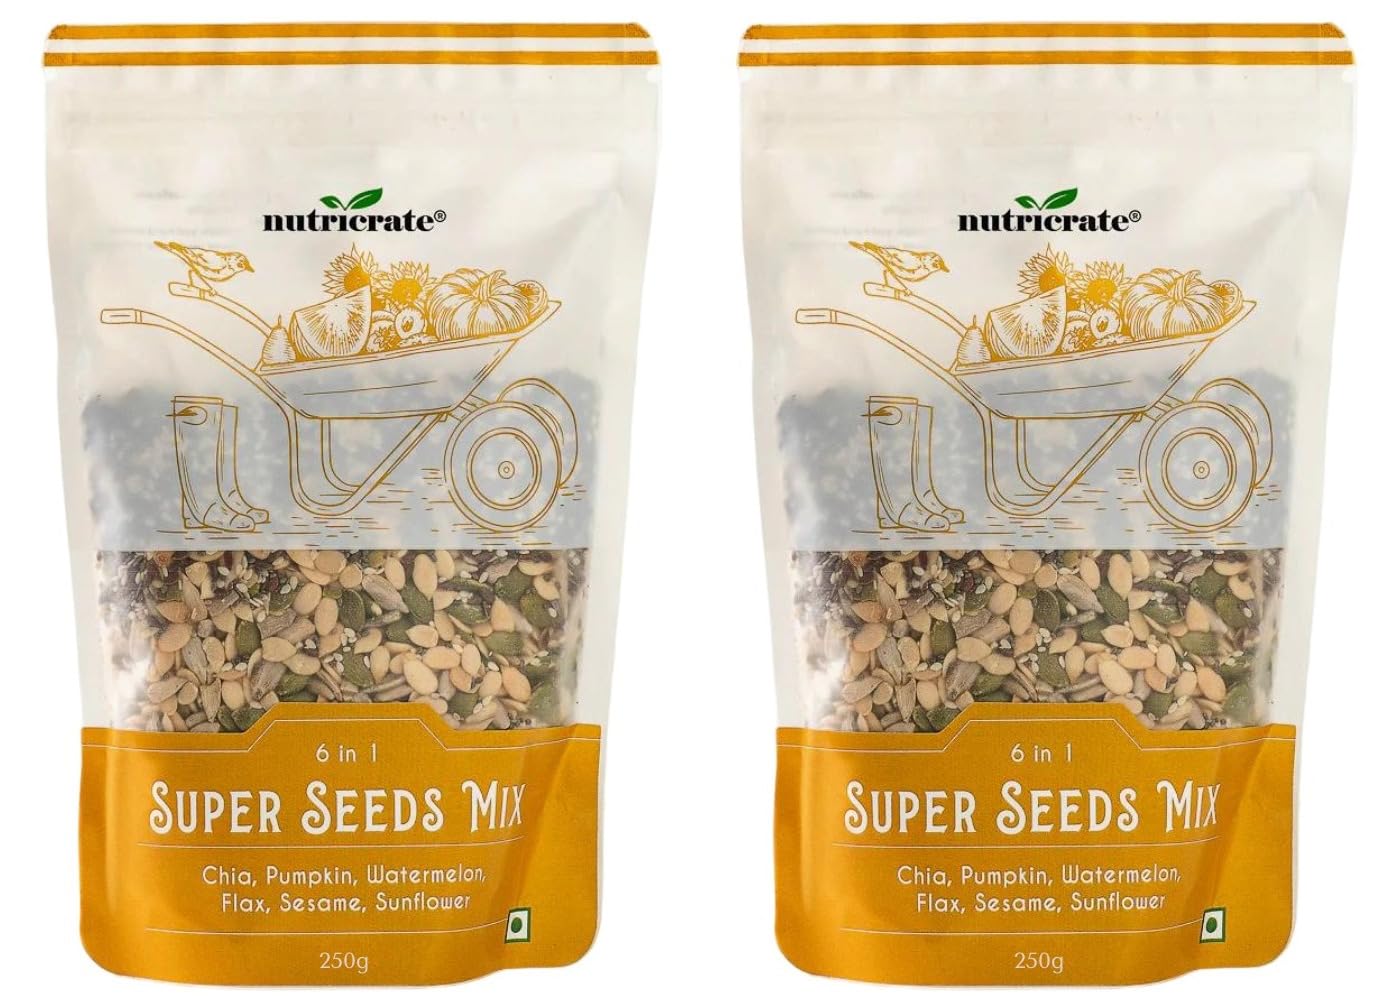 NutriCrate 6in1 Super Seeds Mix for Eating.